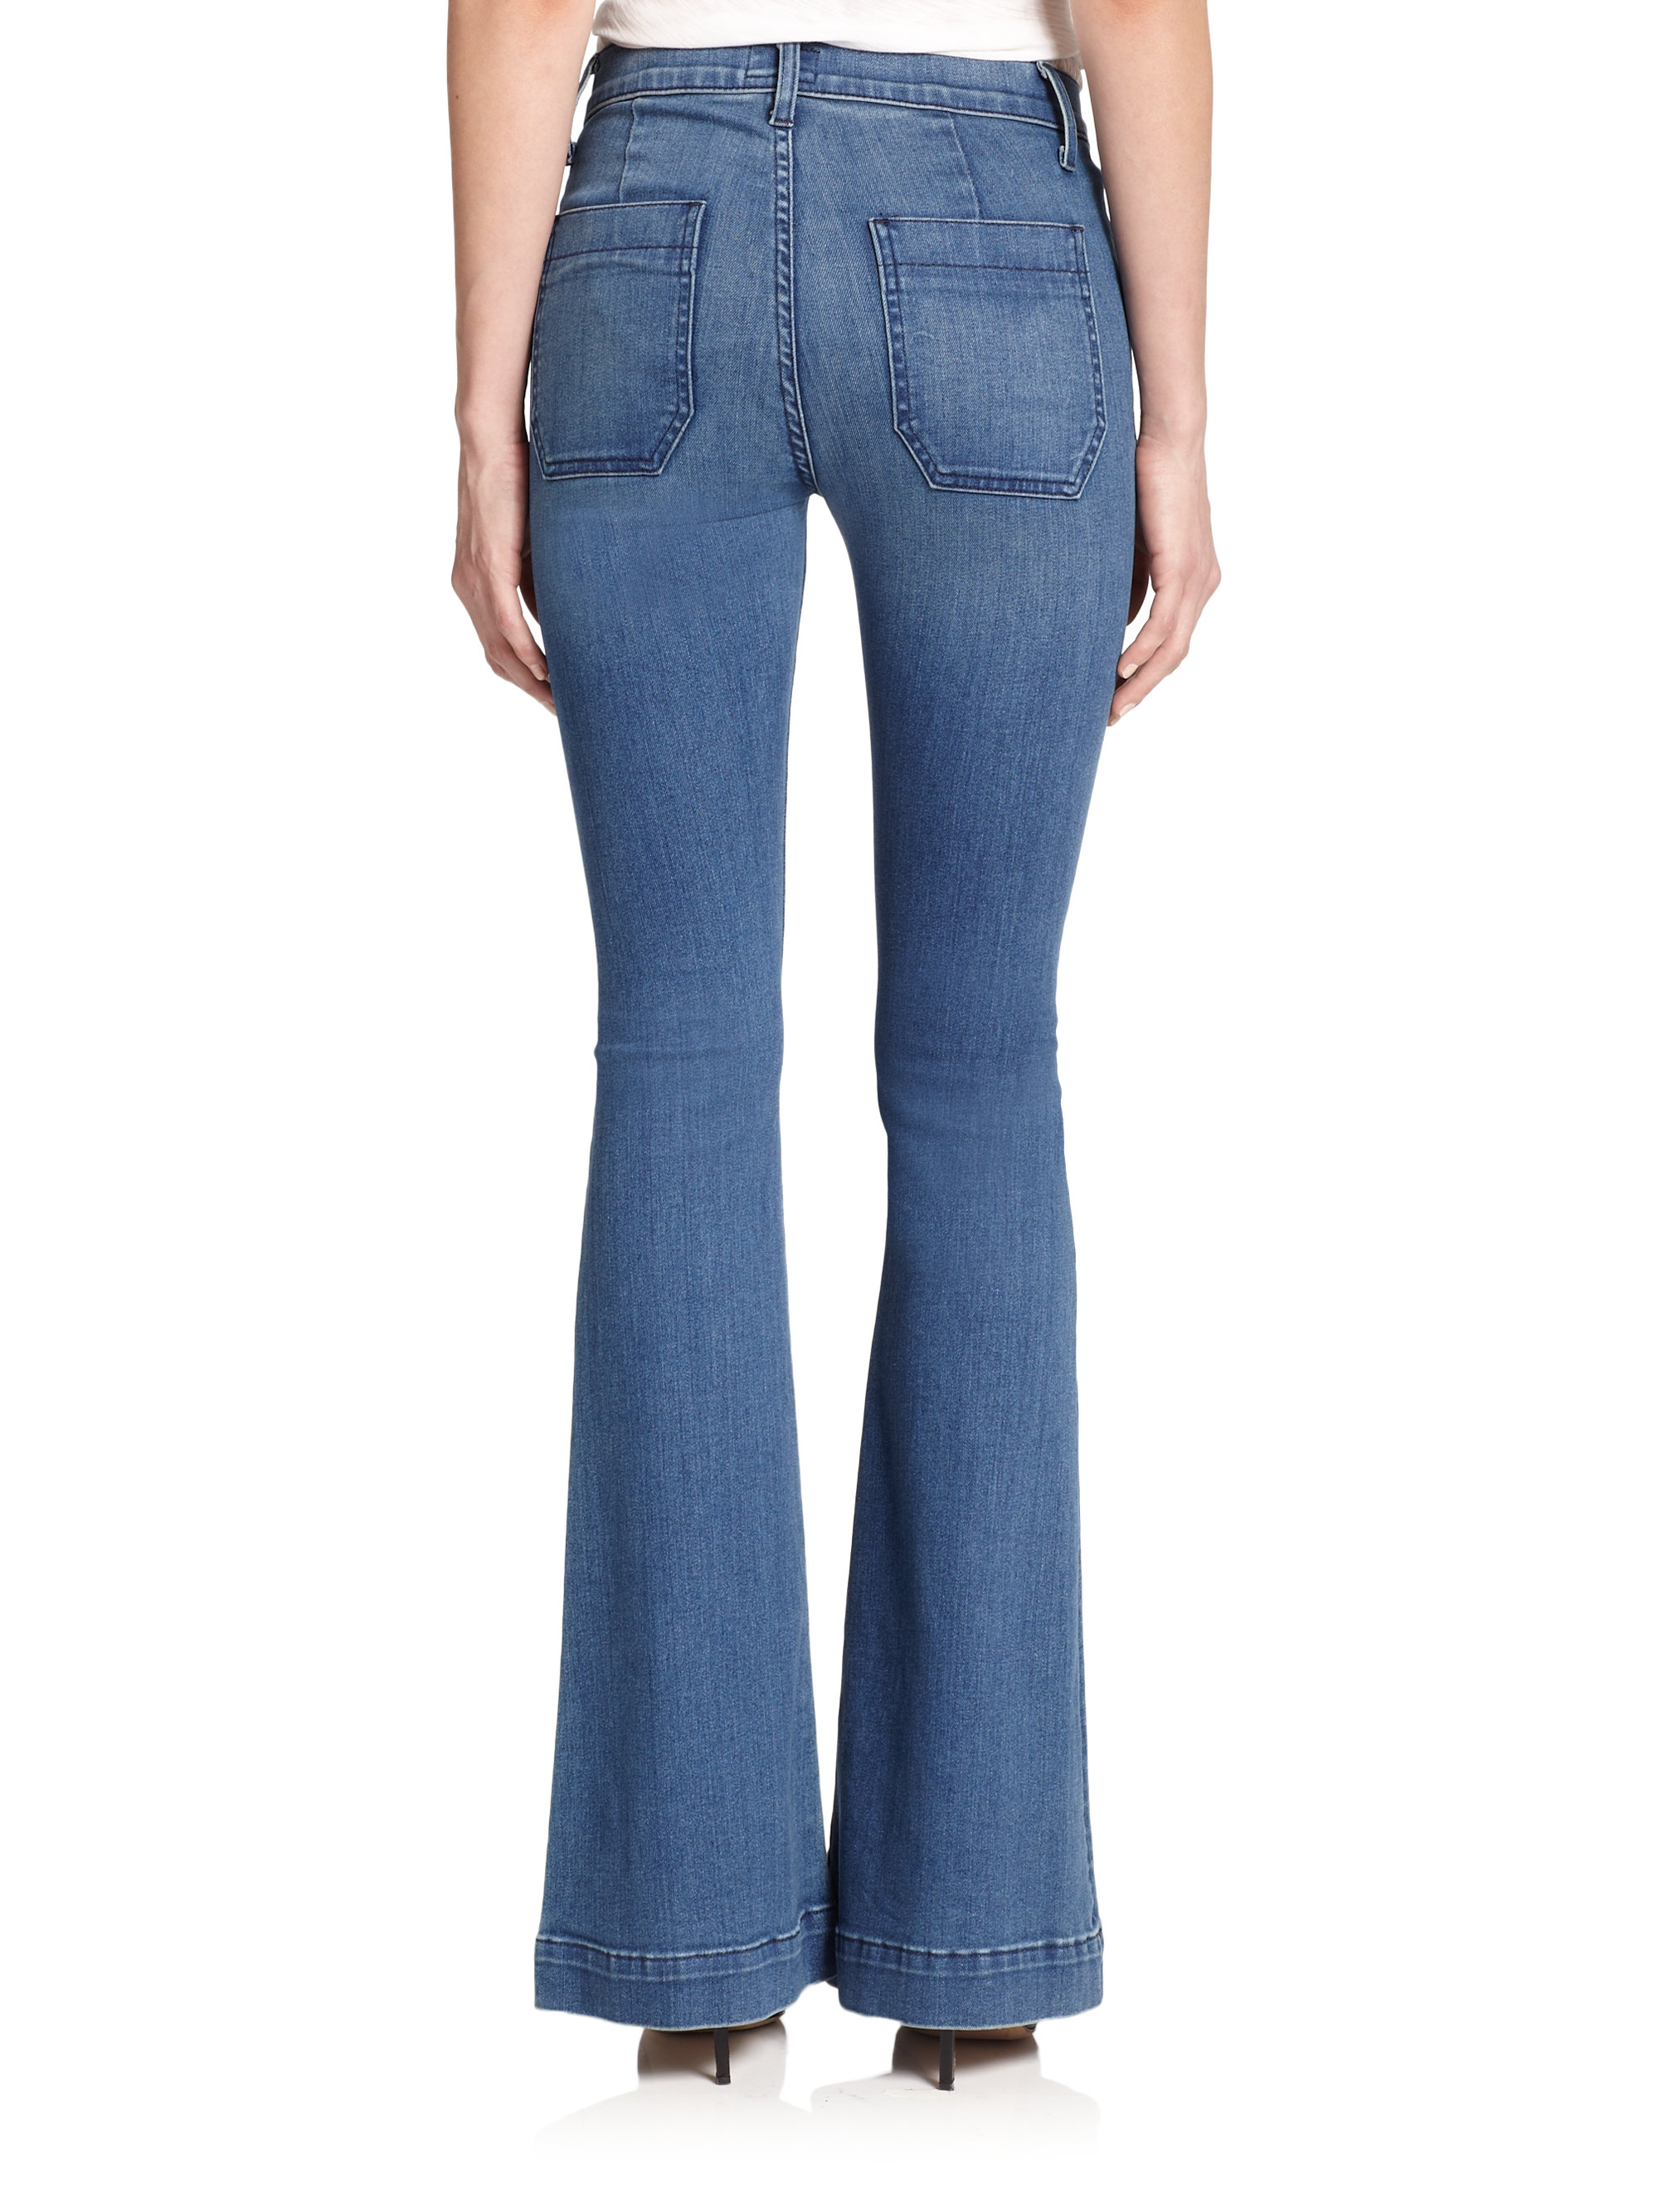 Lyst - Hudson Jeans Taylor High-waist Flared Jeans in Blue